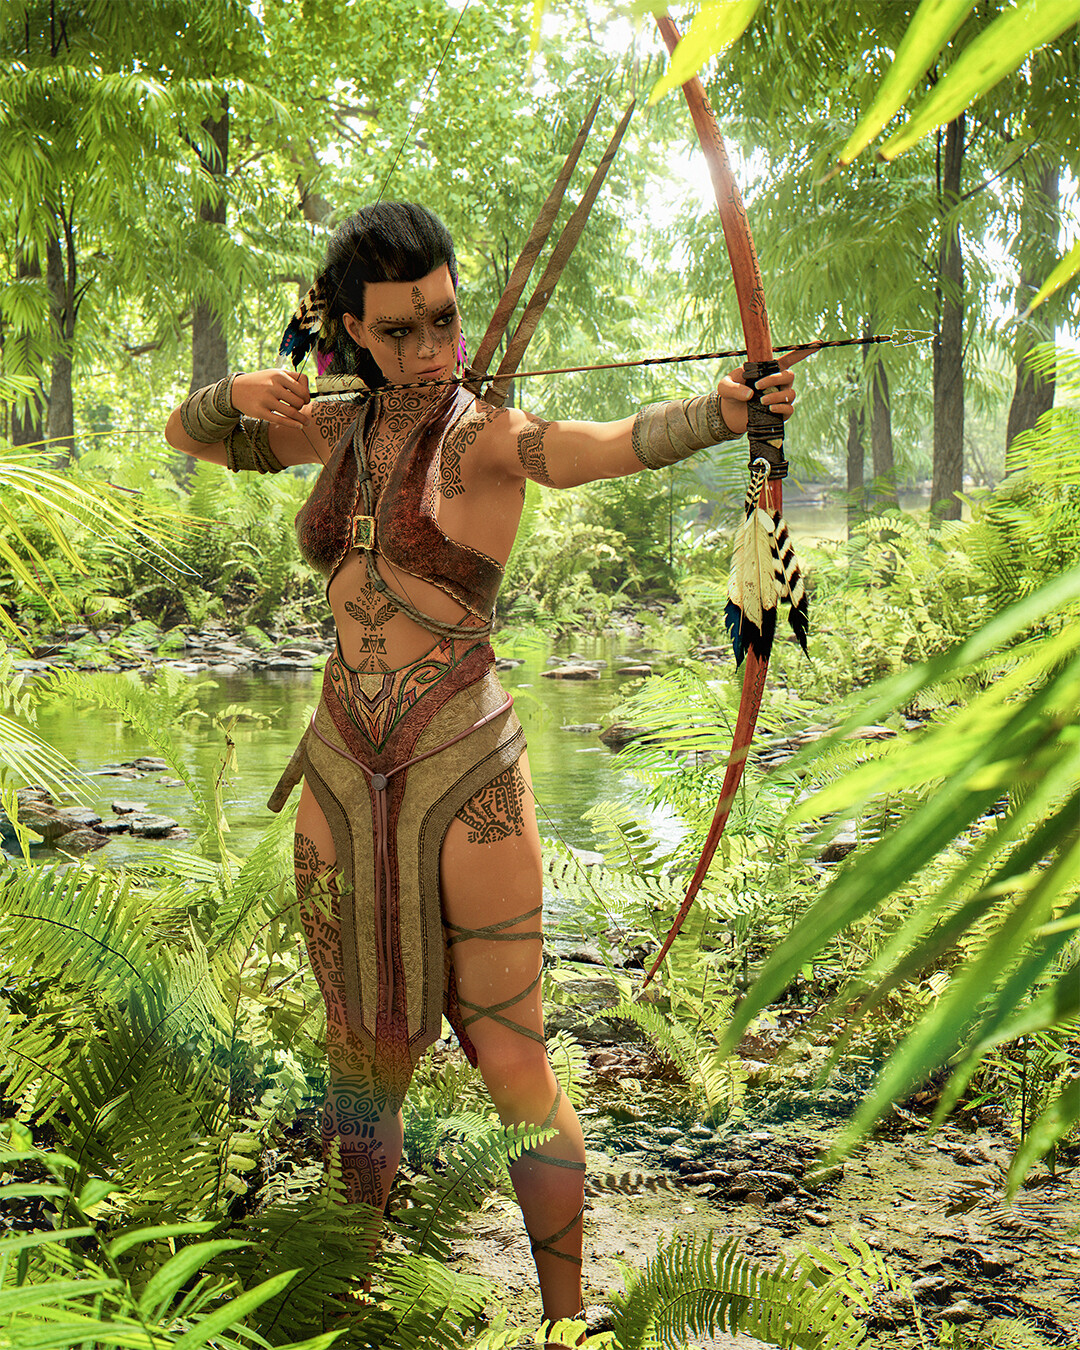 Nossa Terra
'Summoning the ancestral fighter spirit of the ancient warriors of the Amazon.'